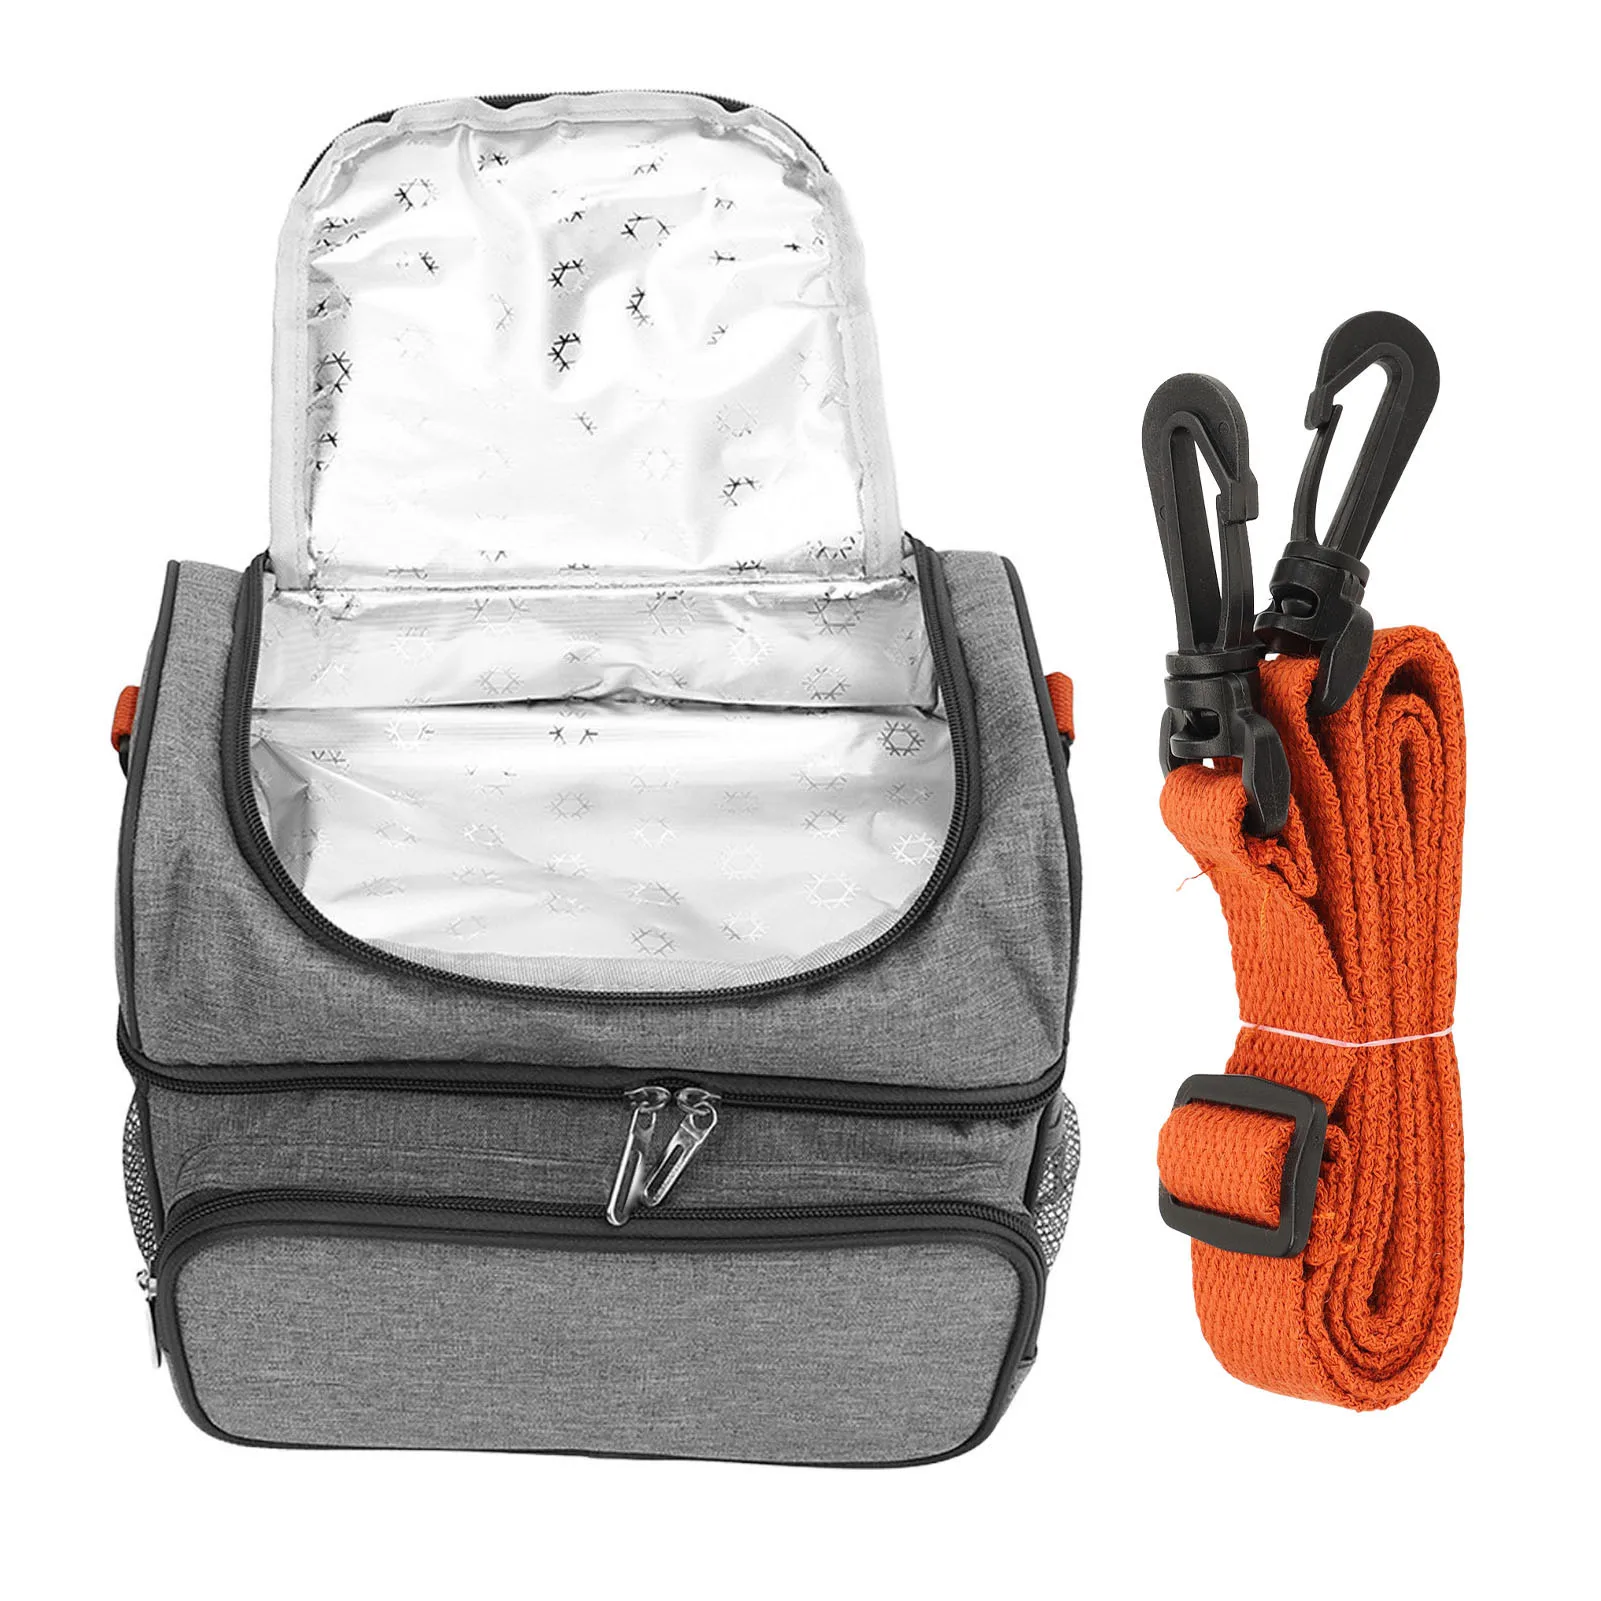 

Collapsible Cooler Bag Double Layer 10L Large Capacity Leakproof Portable Insulated Lunch Bag for Outdoor Picnic Camping